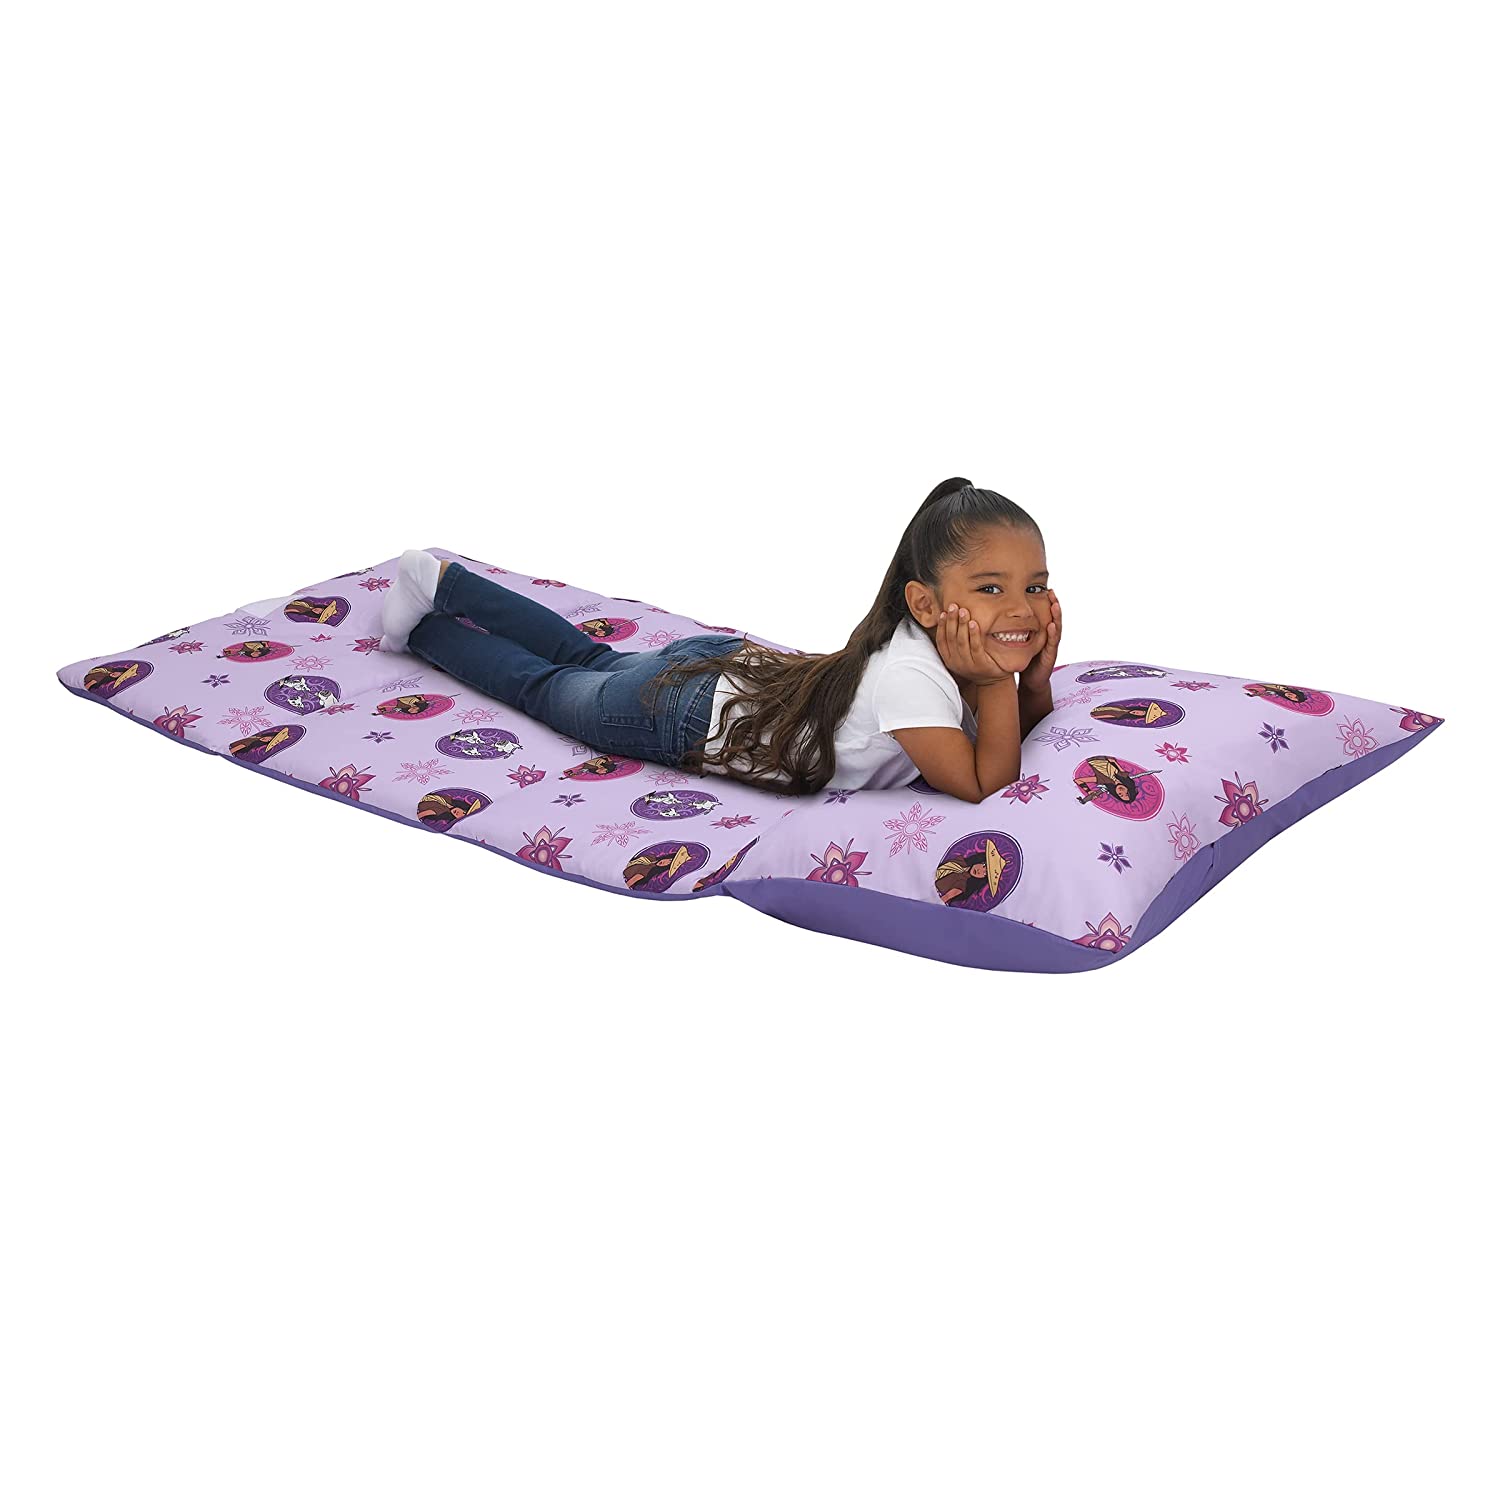 Disney Raya & The Last Dragon Mythic Pop Deluxe Easy Fold Nap Mat,  Purple, Magenta, Tan - Includes a built-in handle